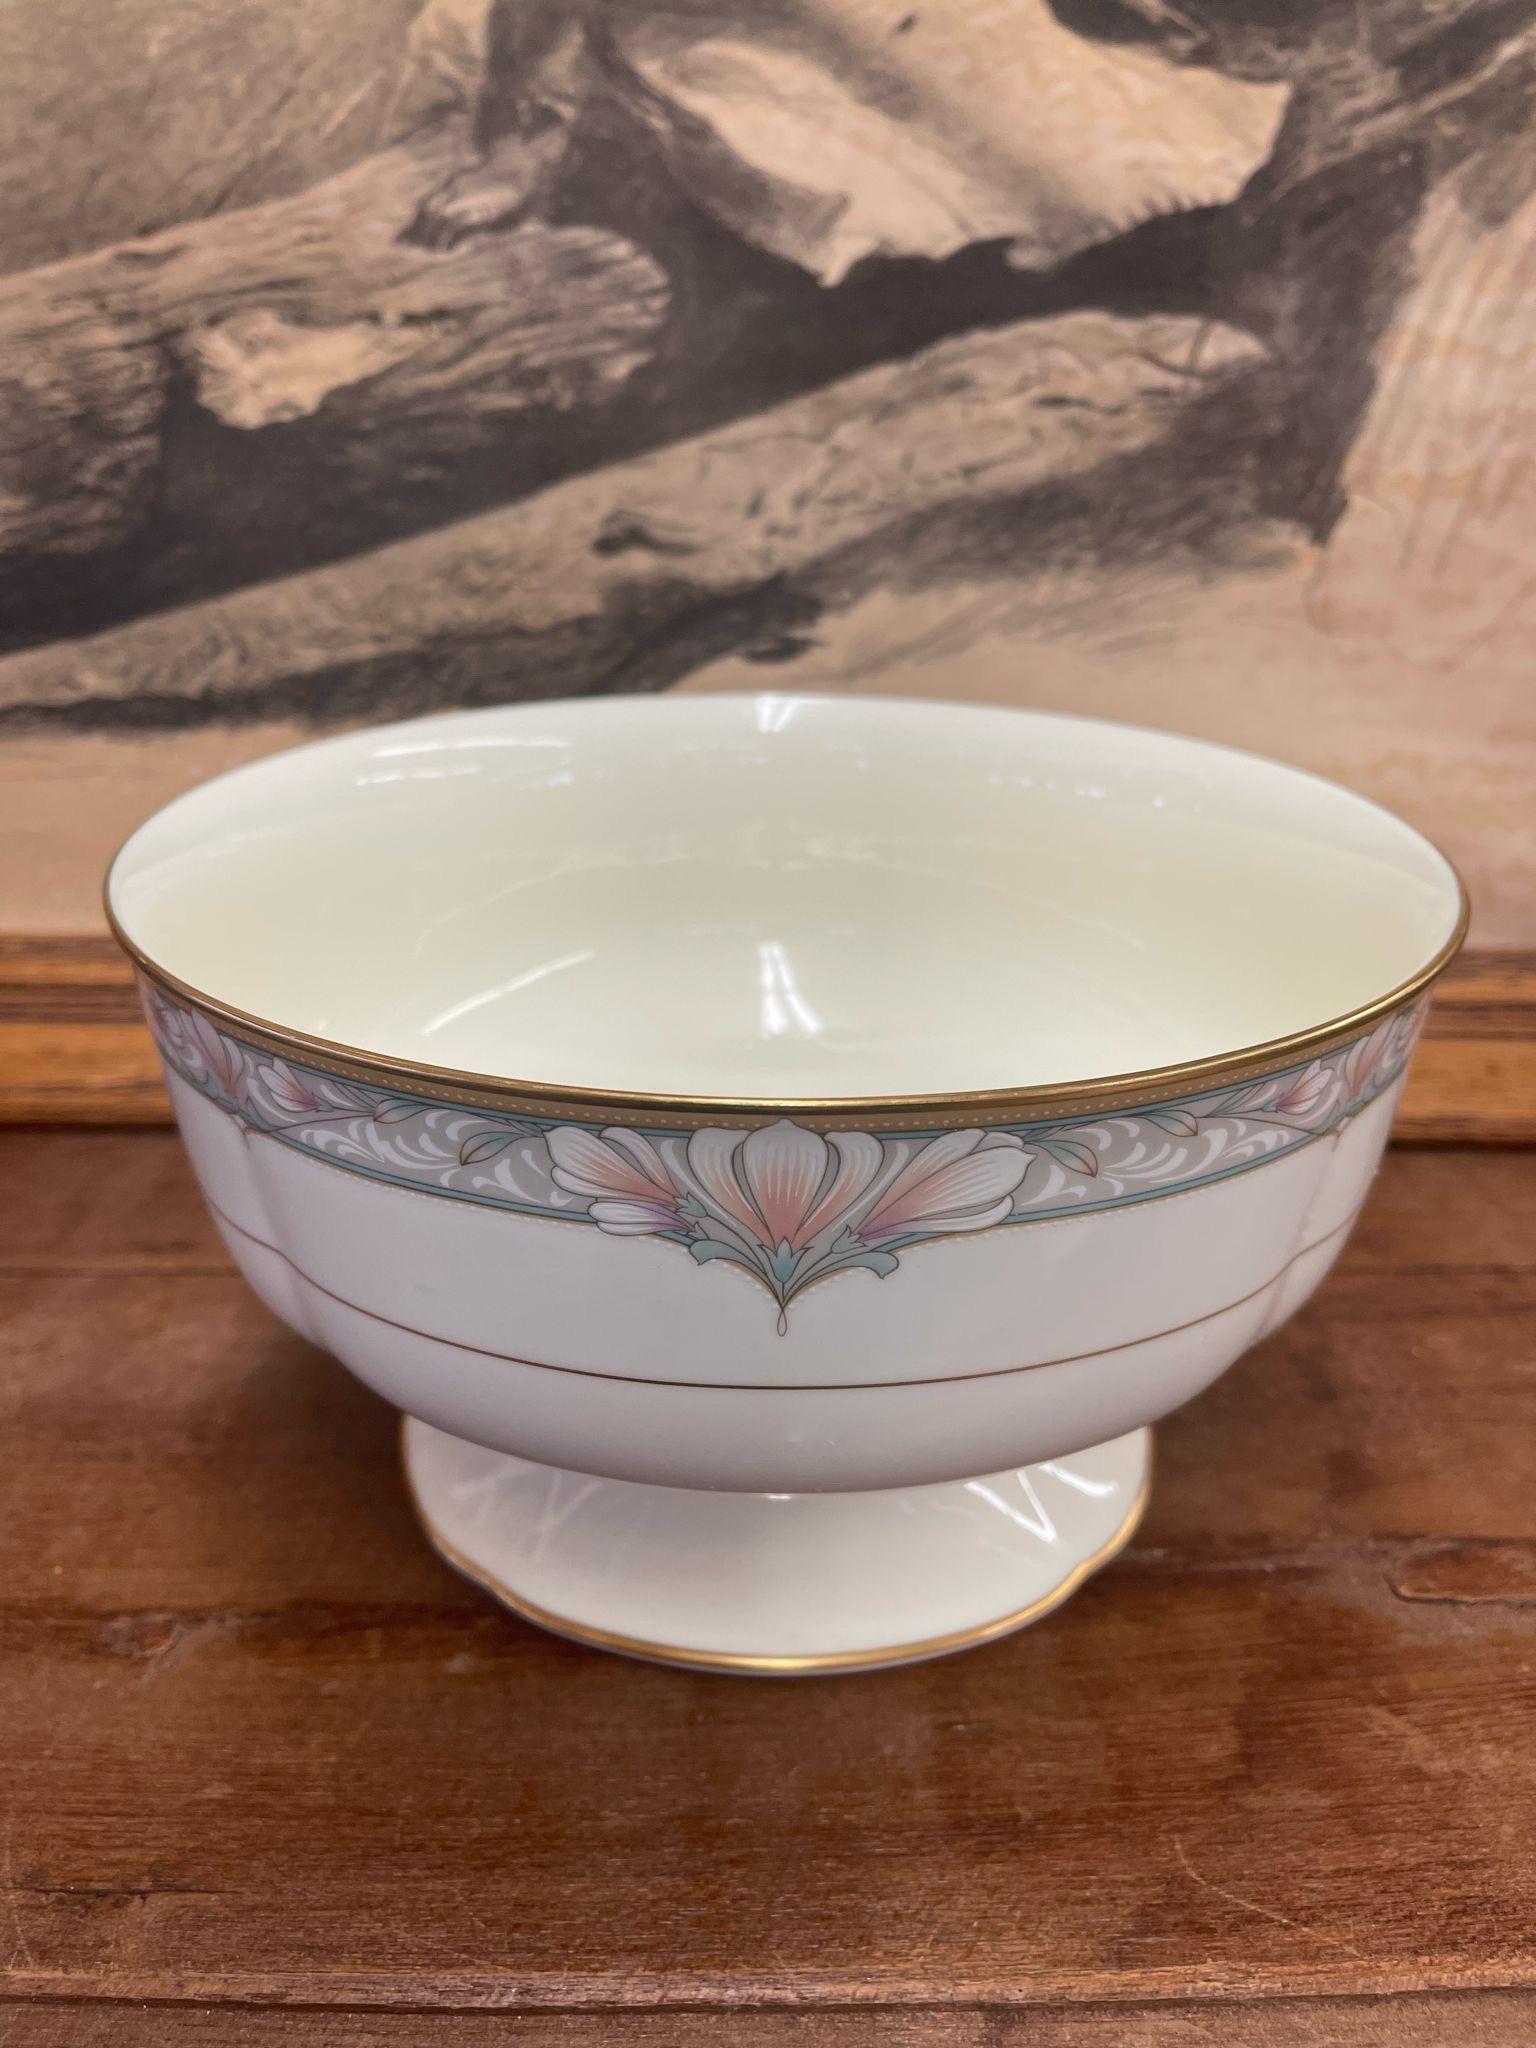 This Beautiful Bowl Features Floral Motif at the Top, with Gold Toned Banding. Makers Mark on the Bottom, made in Japan. Vintage Condition Consistent with Age as Pictured.

Dimensions. 9 Diameter ; 5 H